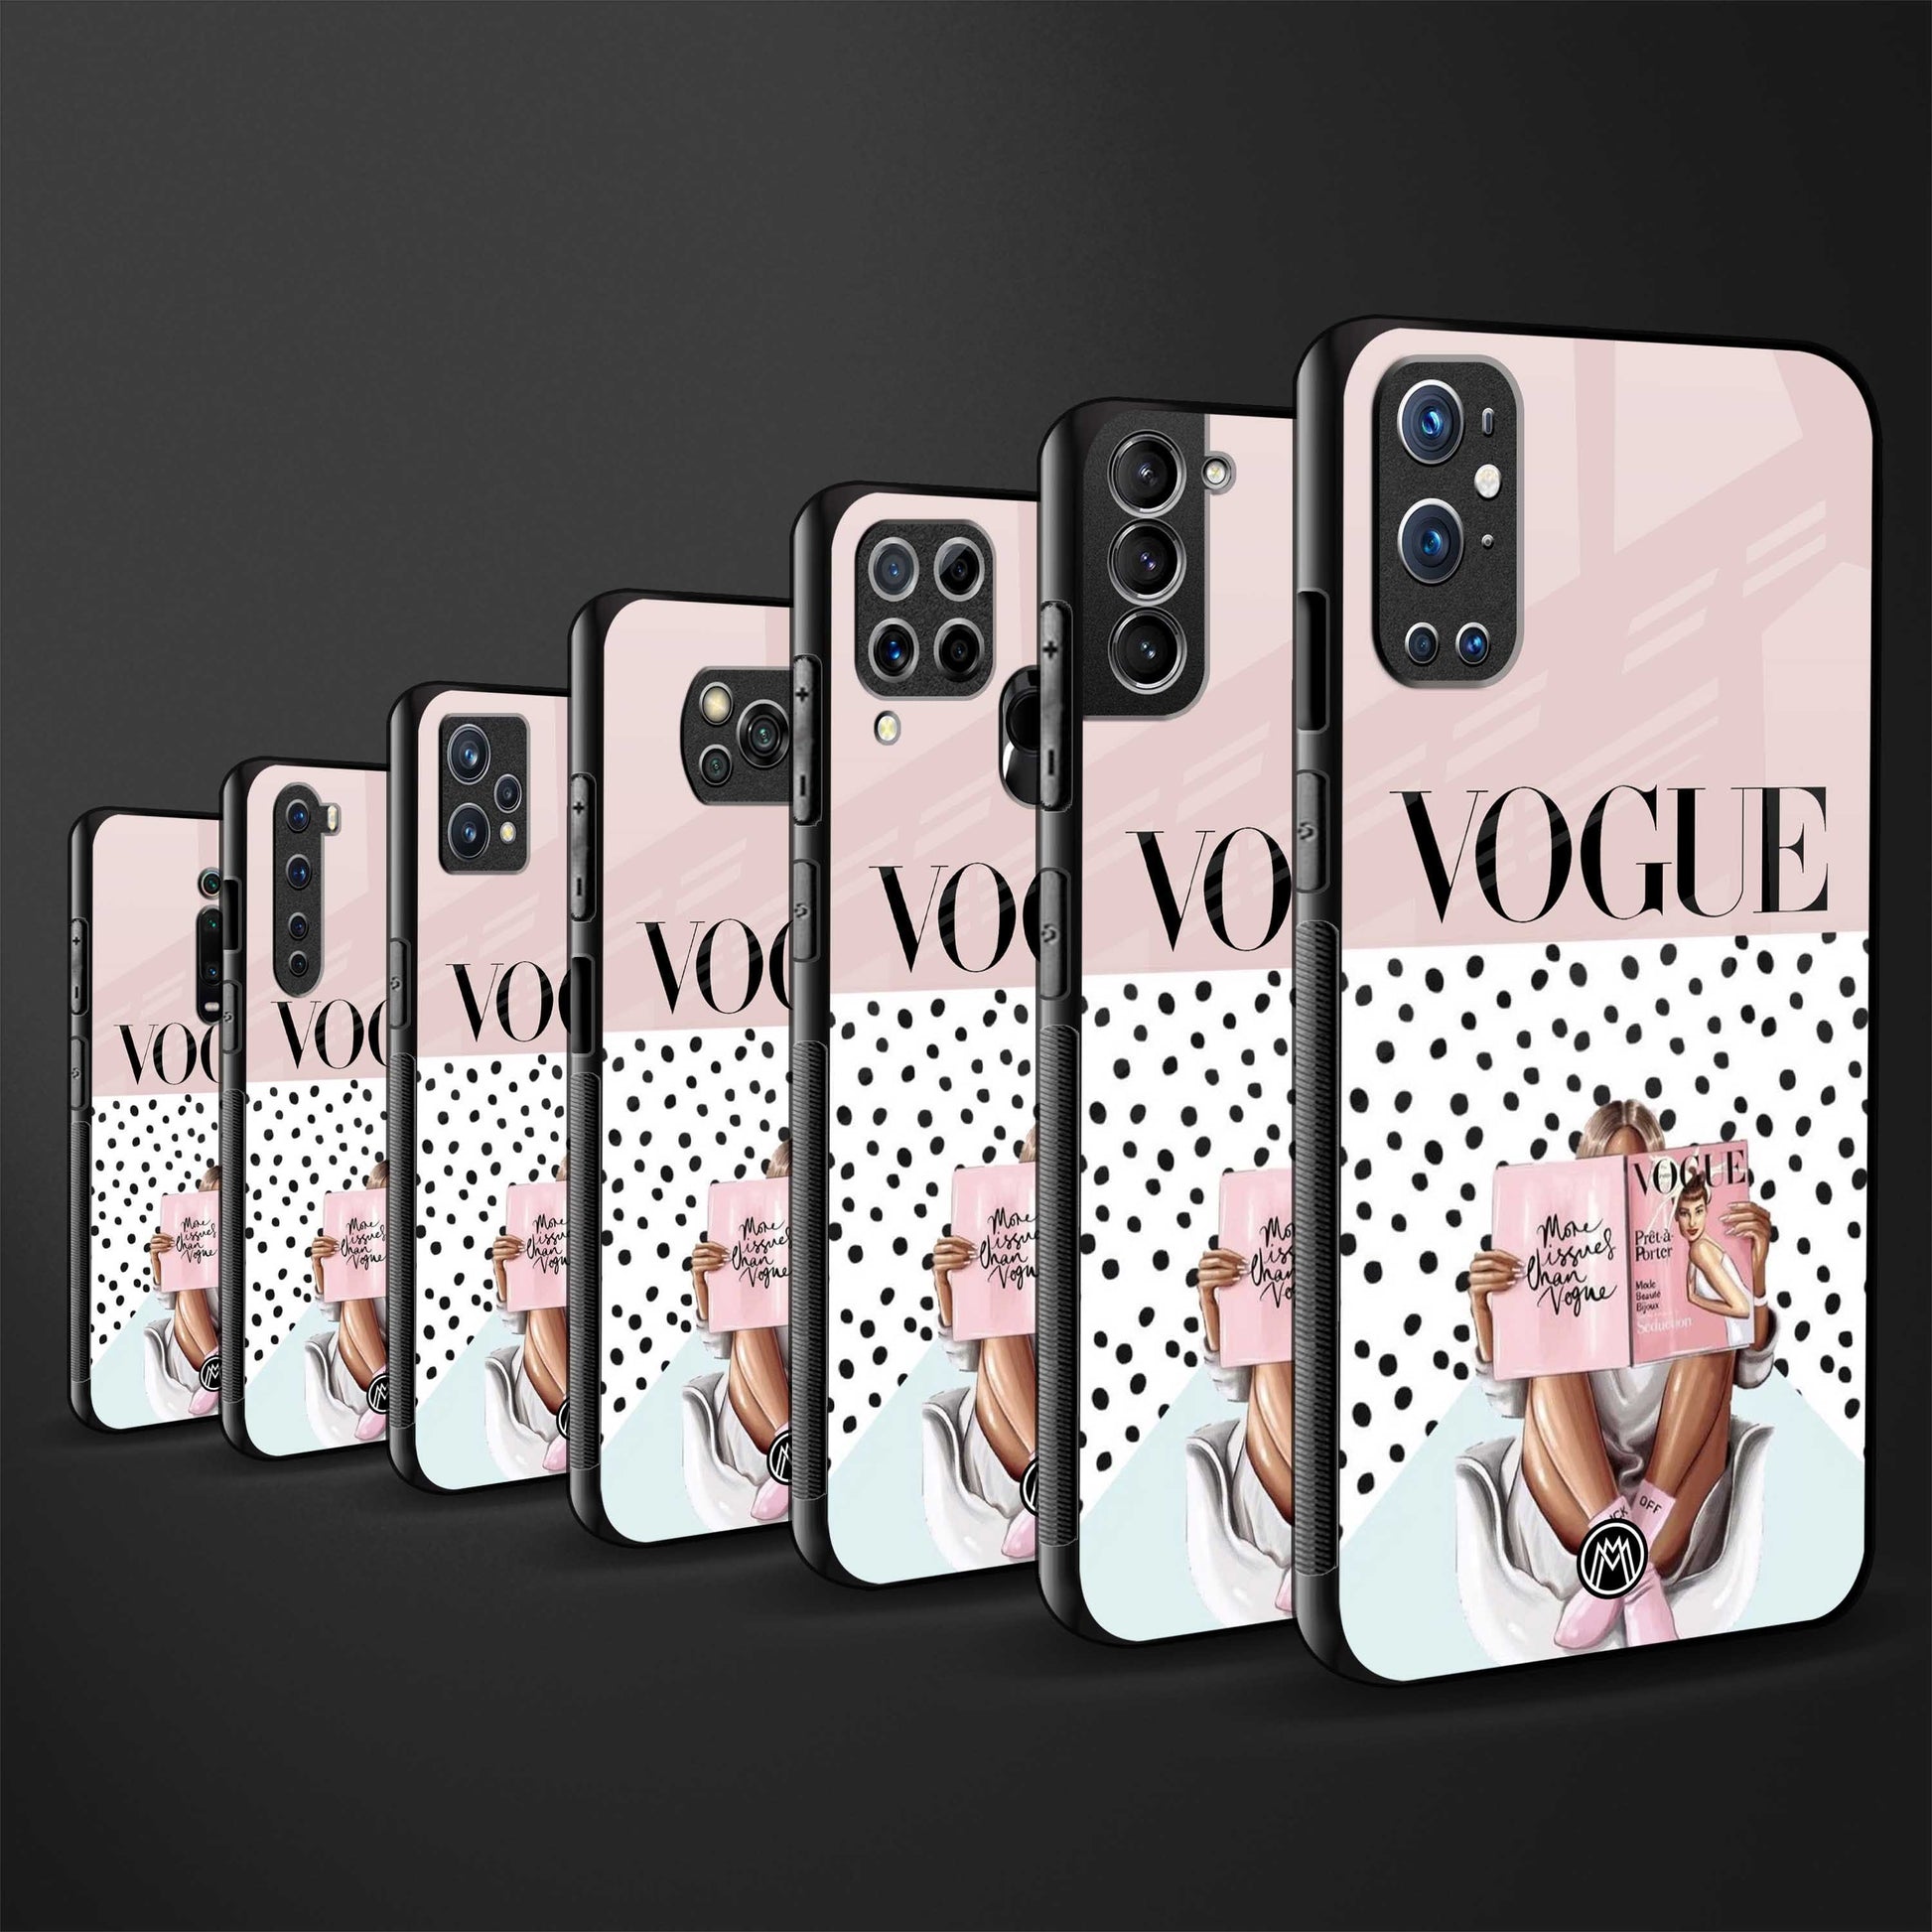 vogue queen glass case for iphone 8 plus image-3